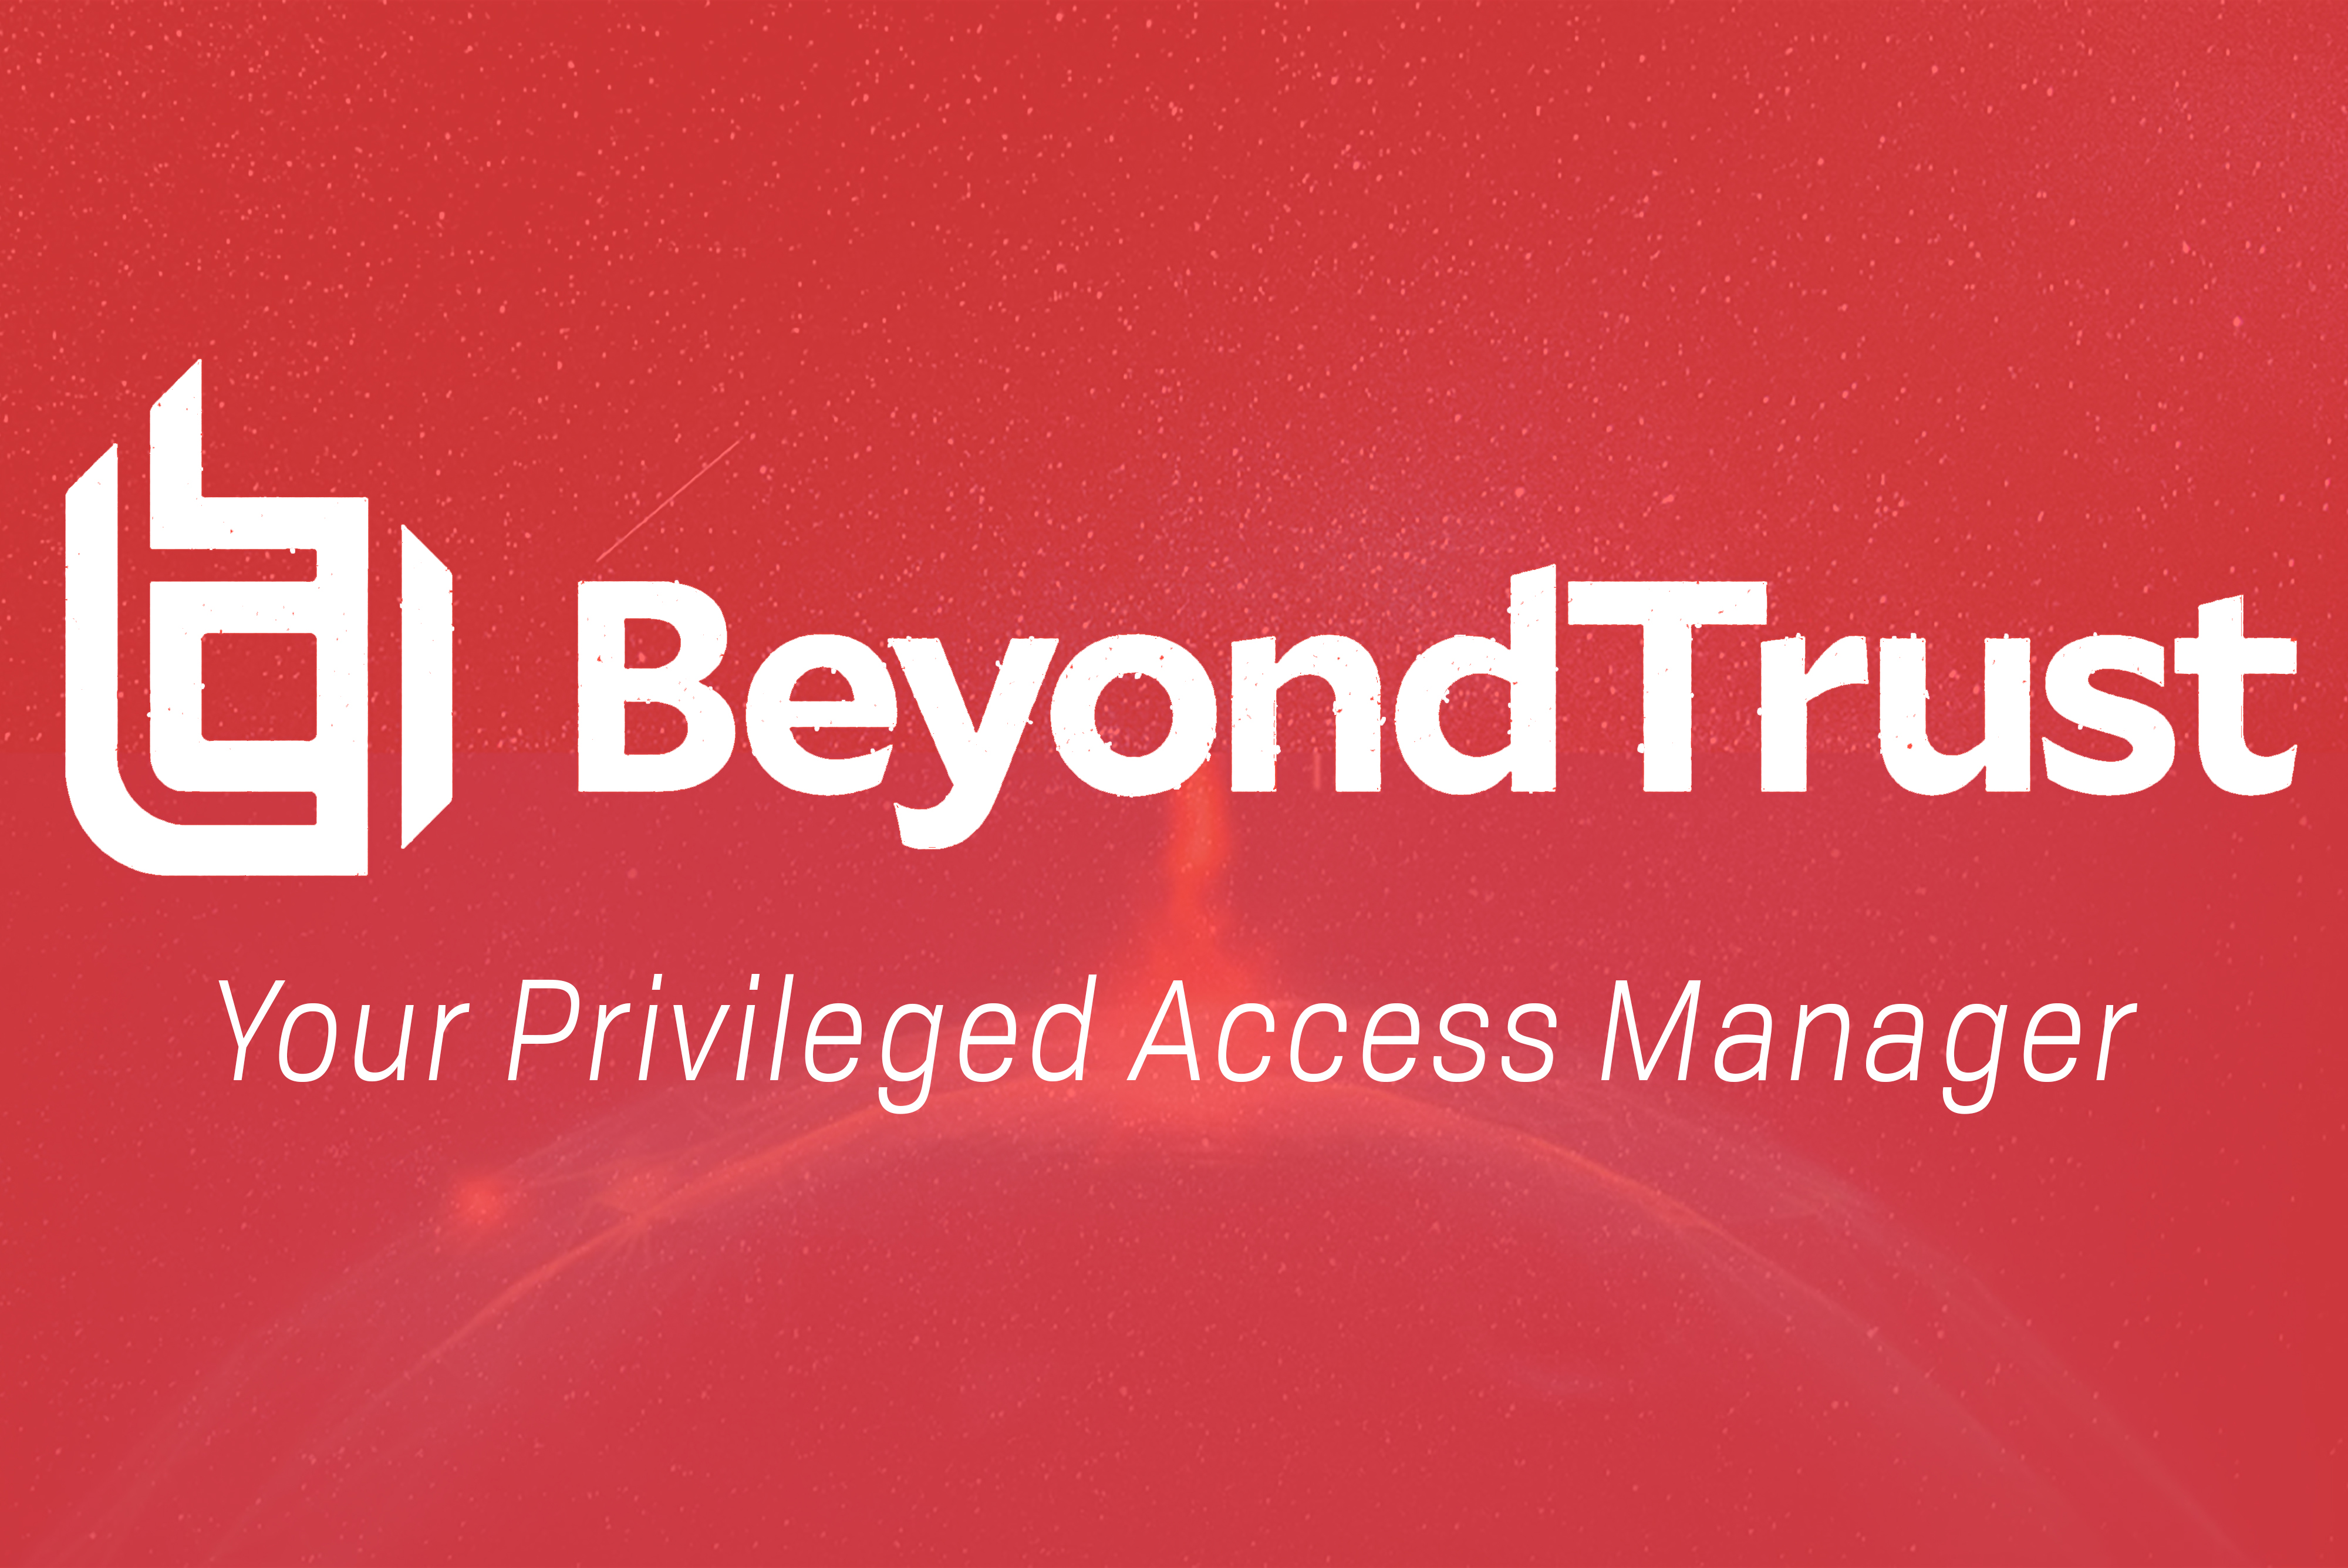 You are currently viewing BeyondTrust: Your Privileged Access Manager